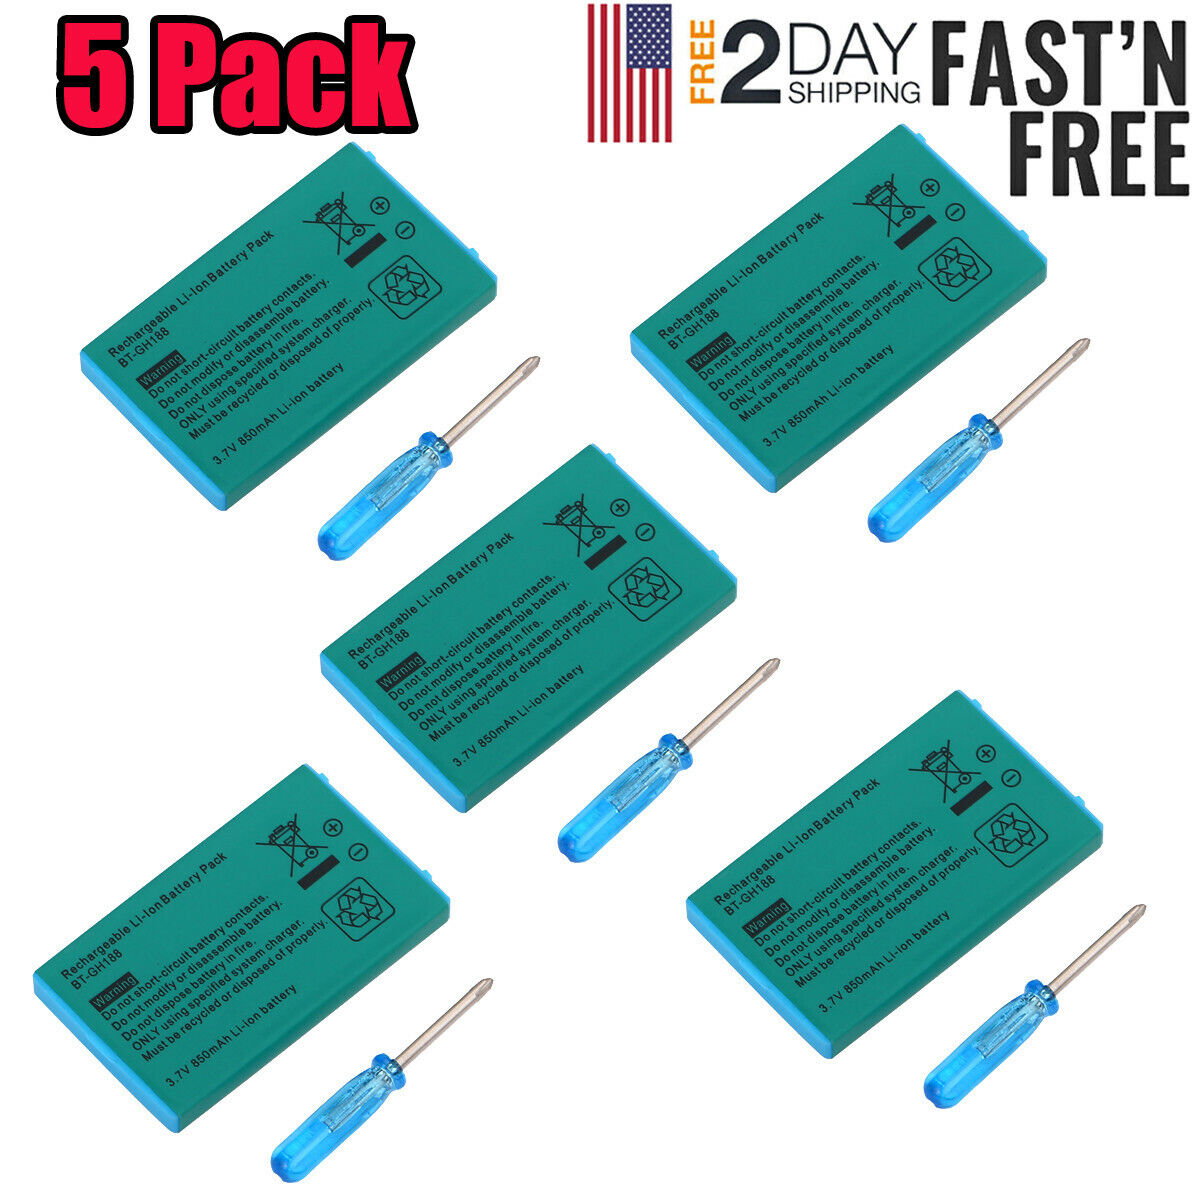 5 Pack Rechargeable Battery Pack For Nintendo Gameboy Advance SP 850mAh 3.7V USA Unbranded